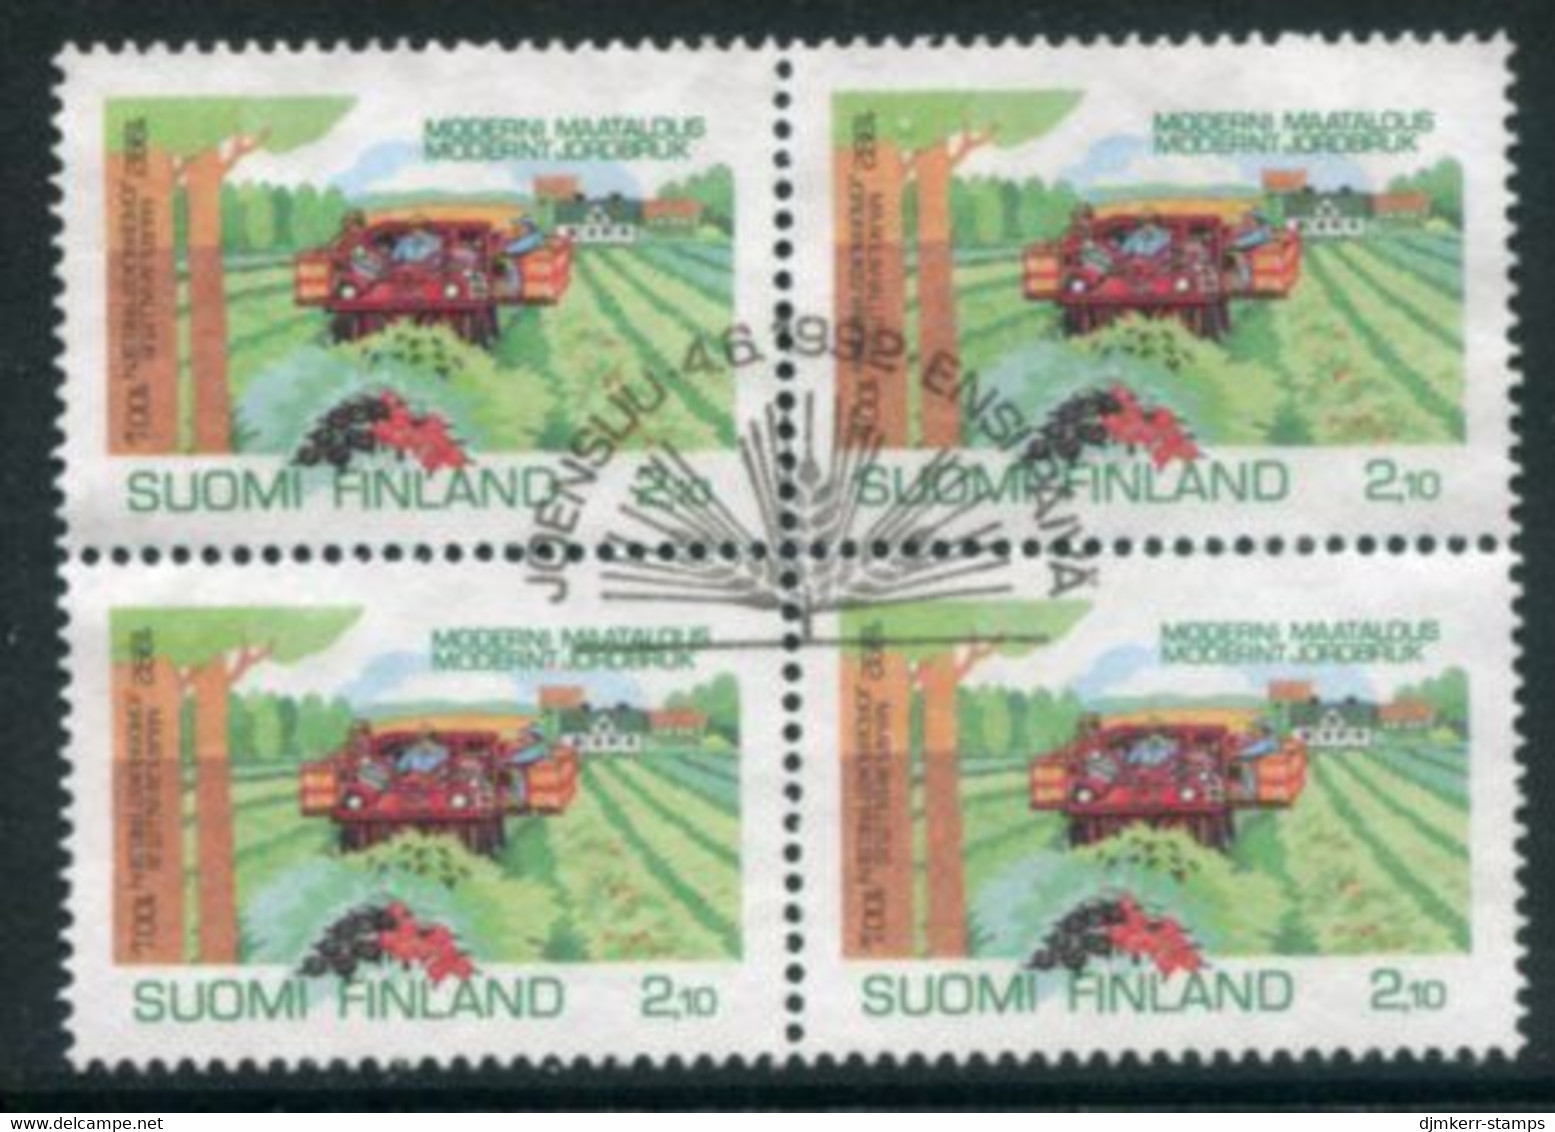 FINLAND 1992 Centenary Of Agriculture Ministry Block Of 4 Used.  Michel 1180 - Gebraucht